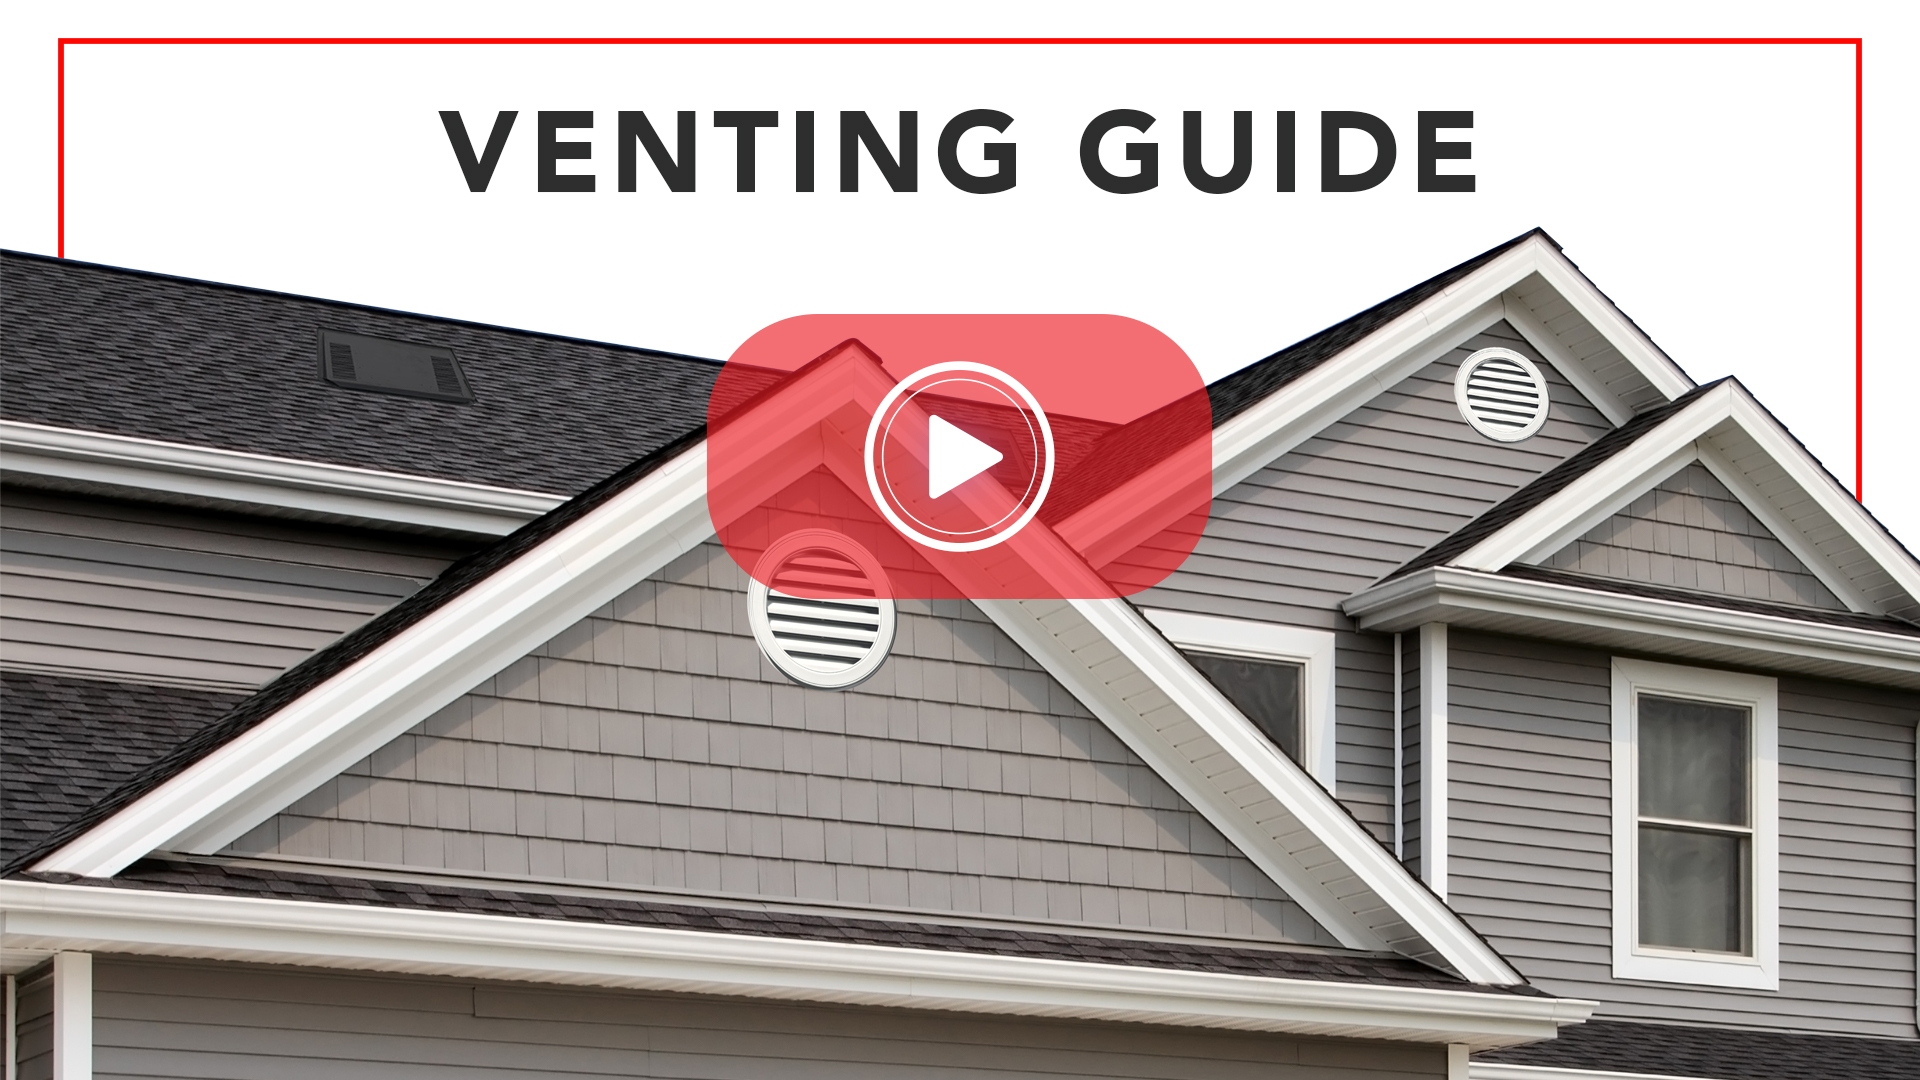 Venting Guide